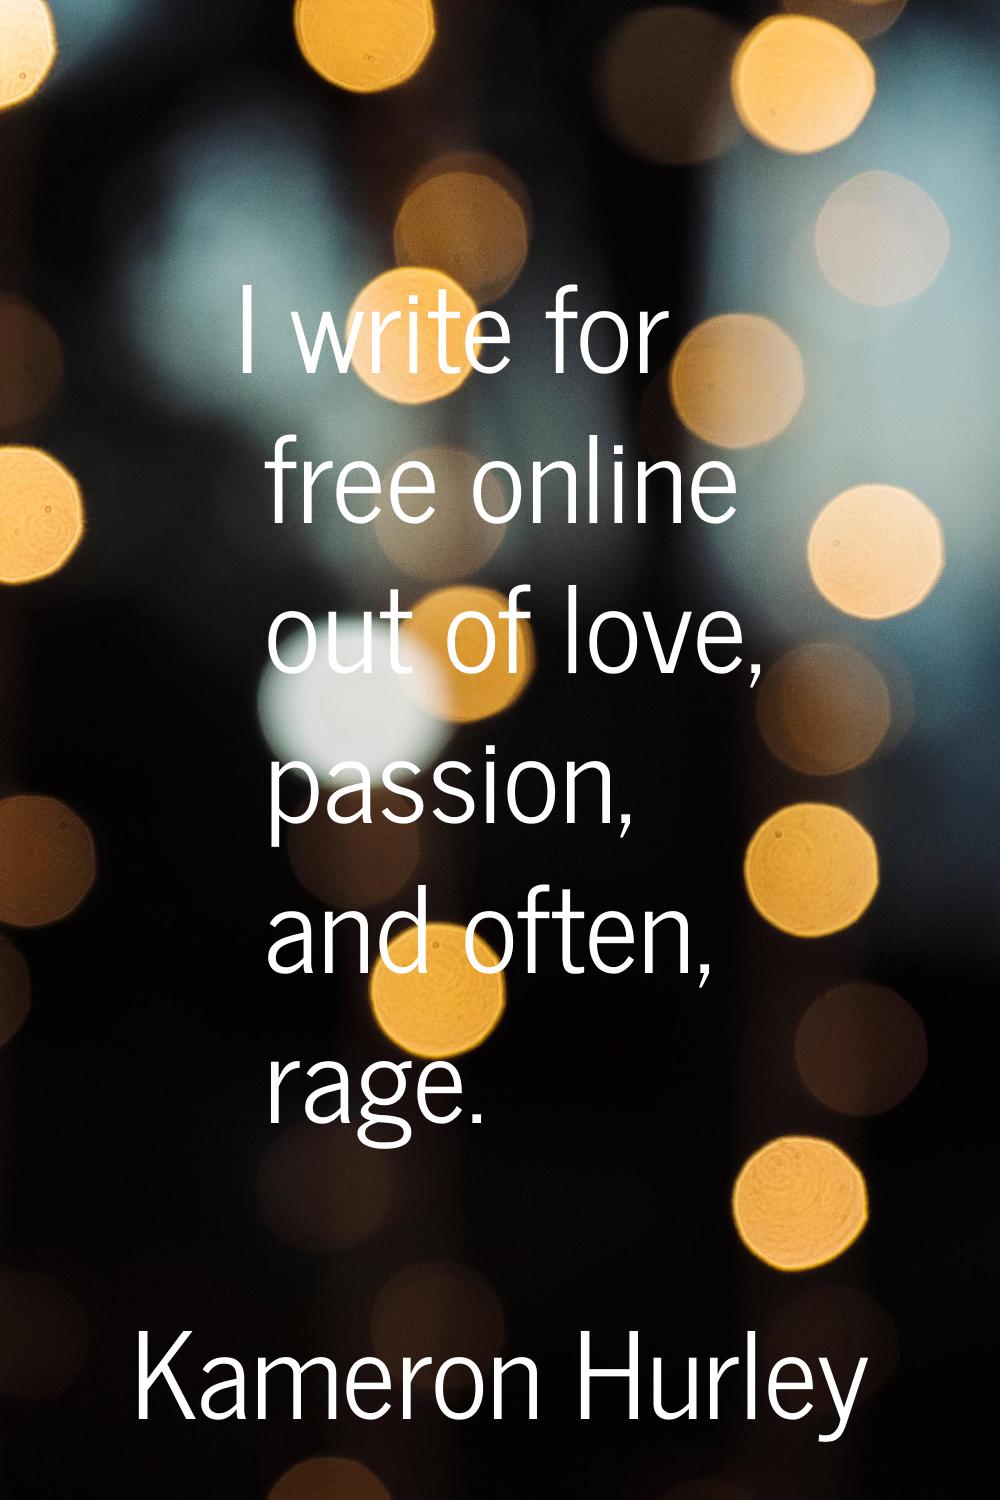 I write for free online out of love, passion, and often, rage.